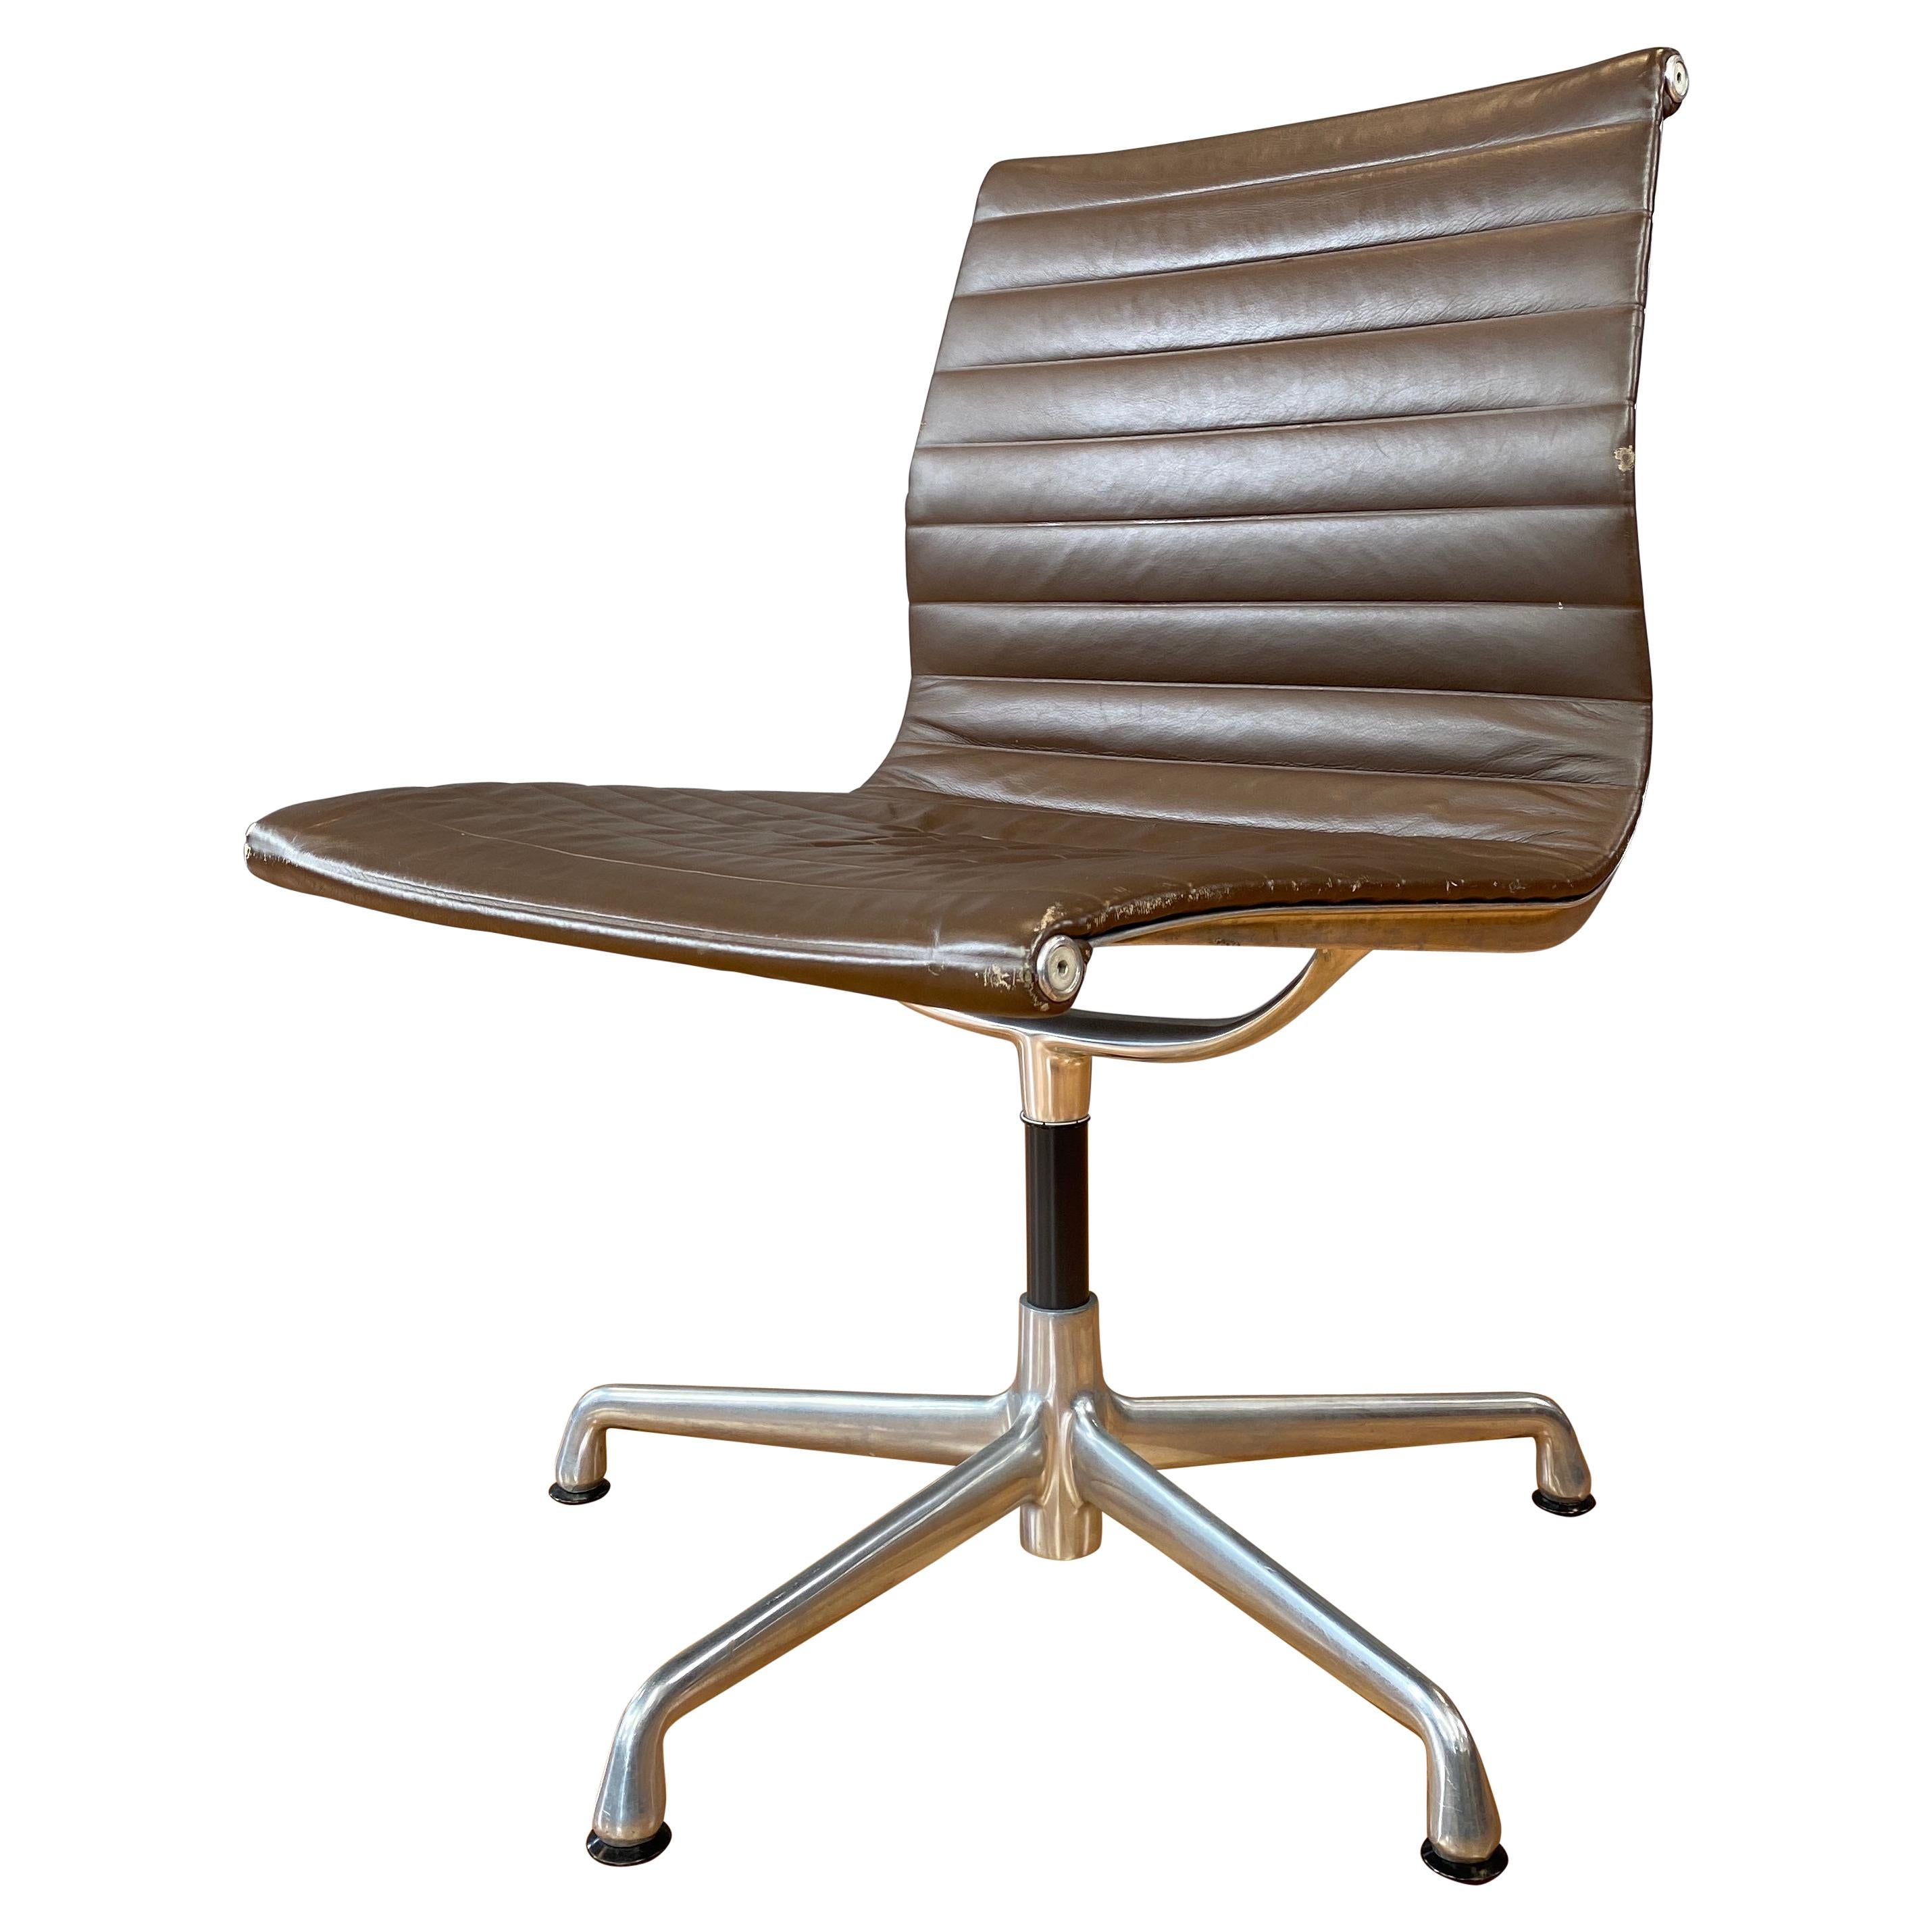 Eames Aluminum Group Side Chair, in Brown Leather 5 Star Base